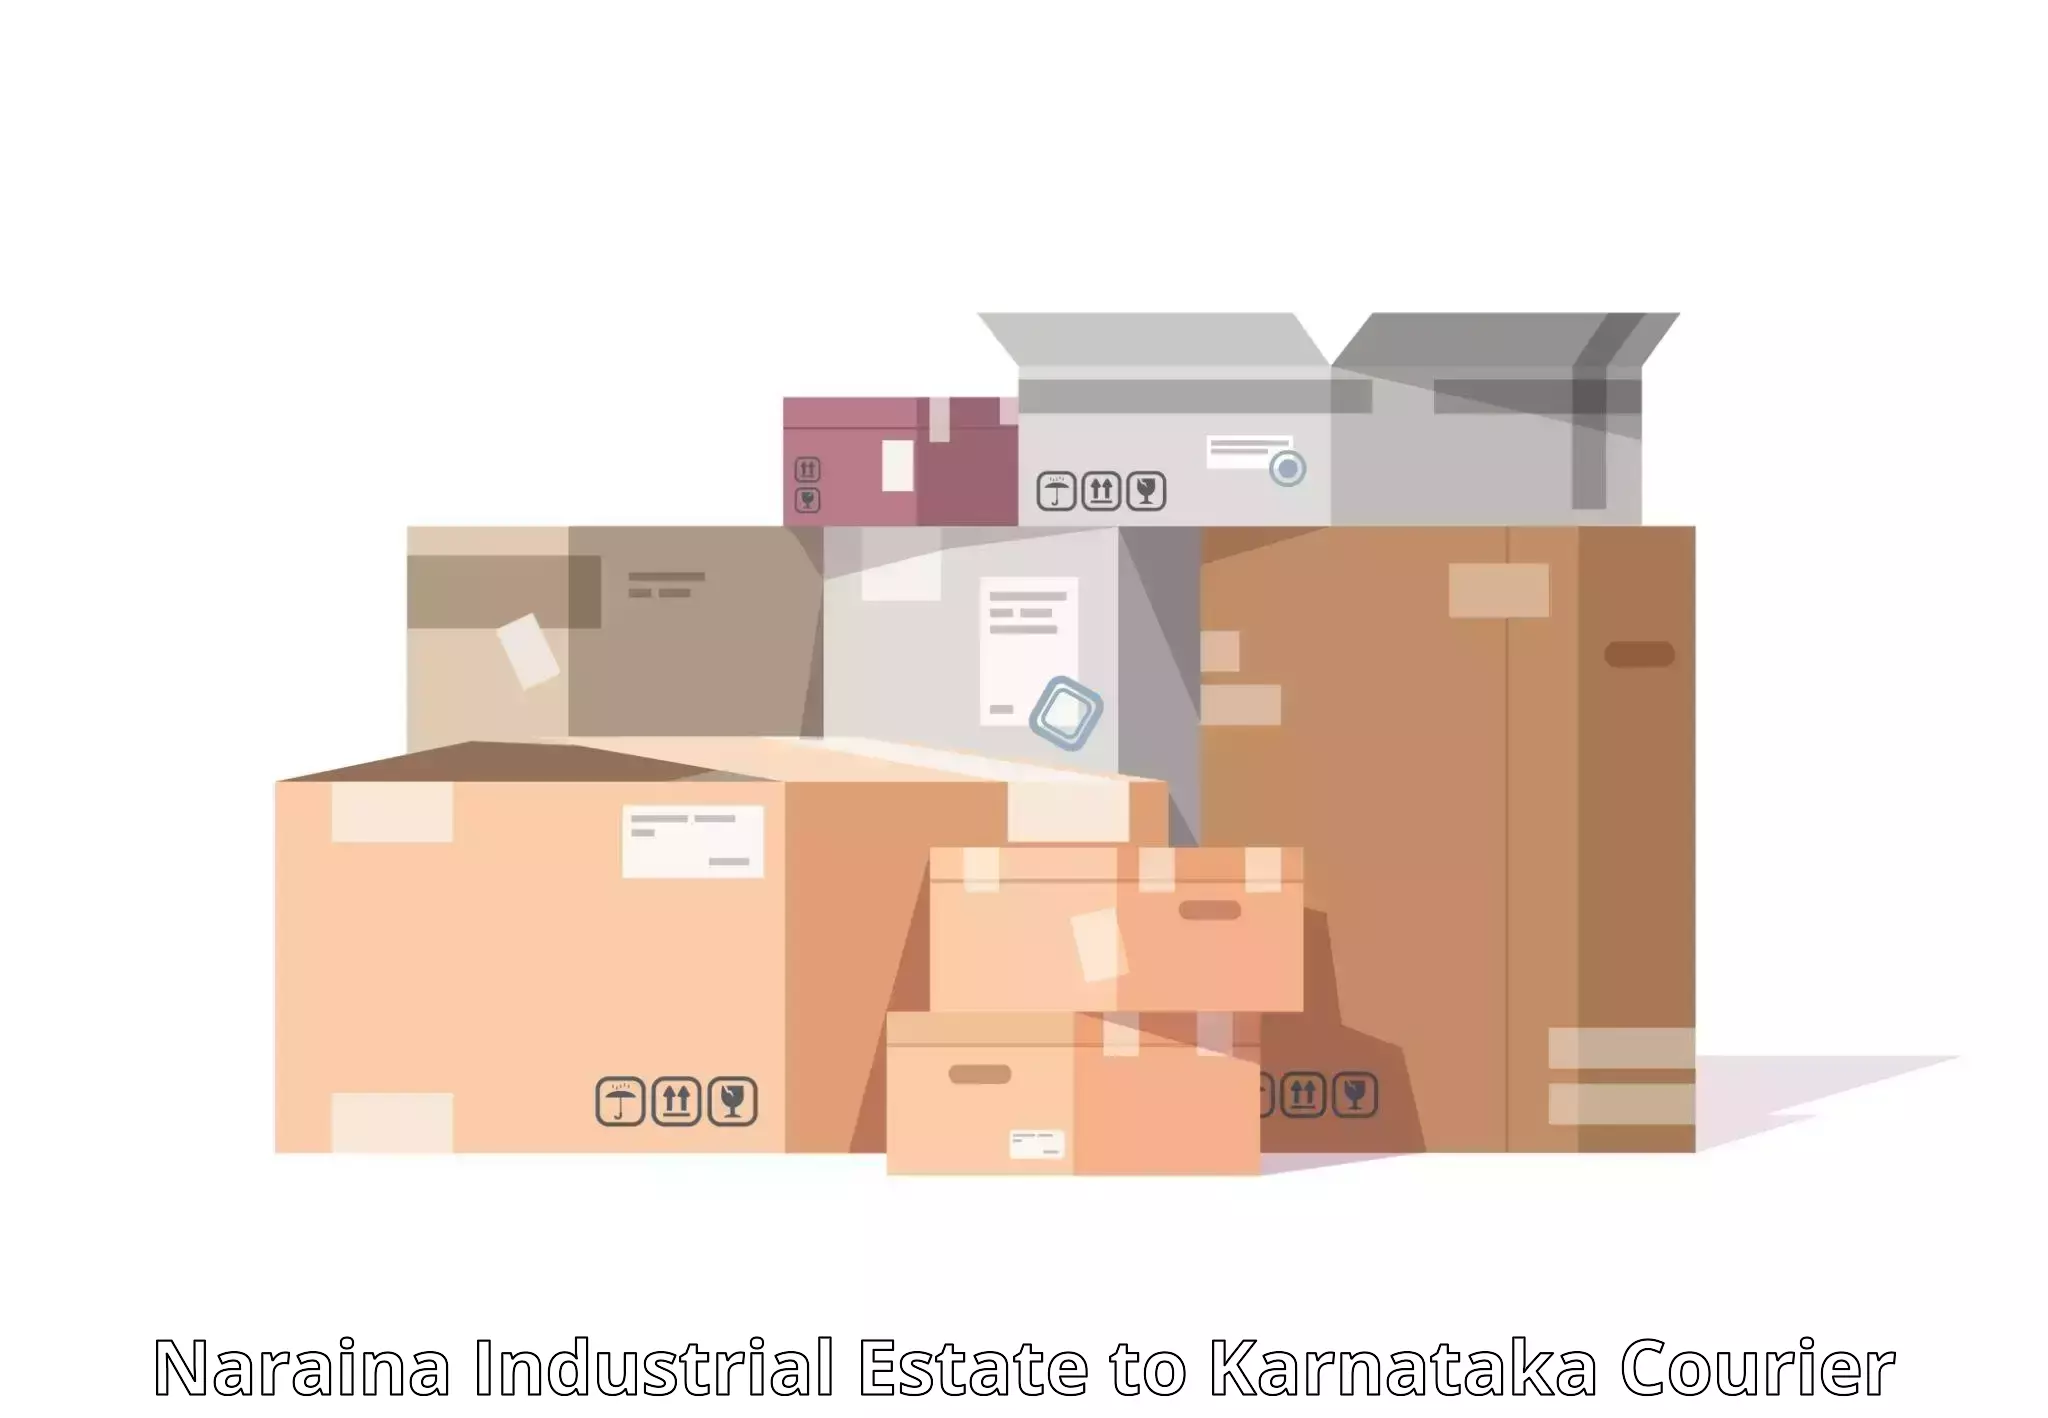 Local delivery service Naraina Industrial Estate to Harpanahalli